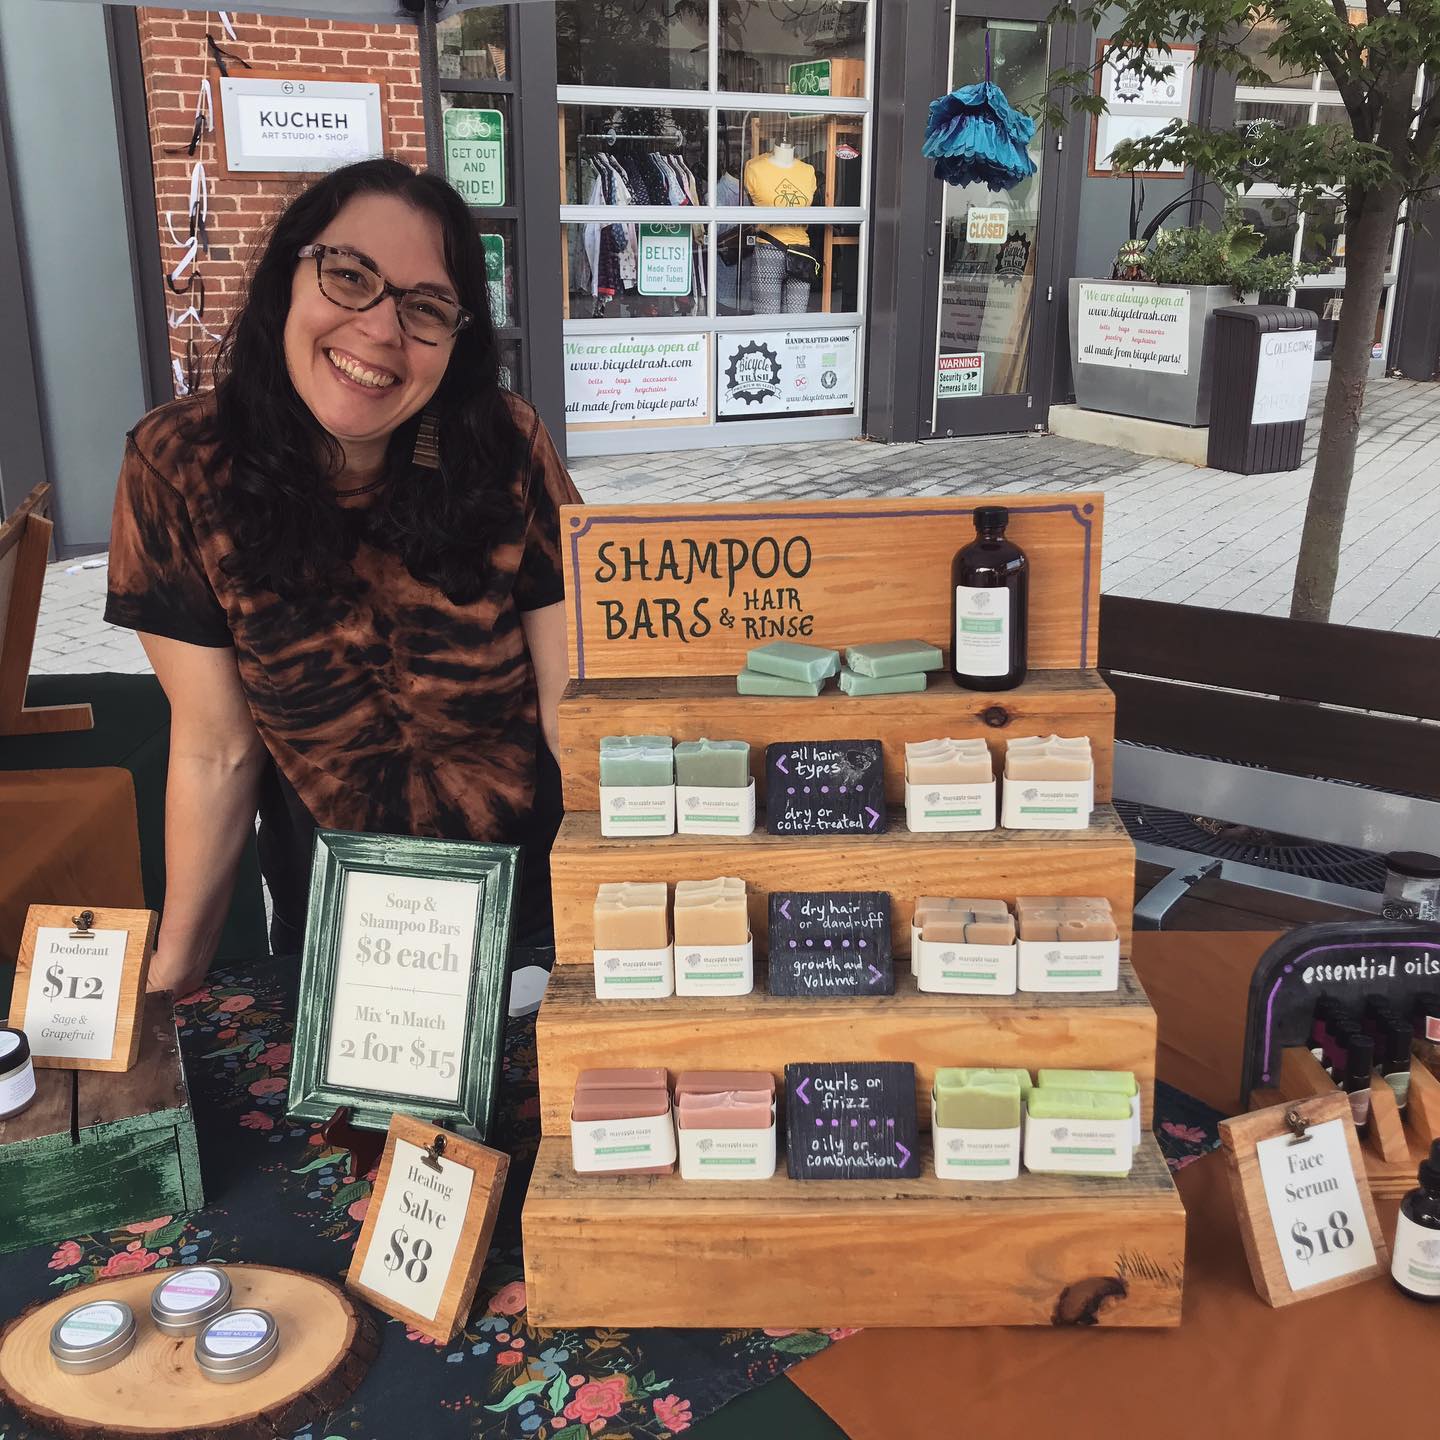 Find shampoo bars and soap at the Brookland Farmers Market today. You can shop a huge variety of craft and food items. Like my shirt, which was hand dyed by @elspeths_epic_dyes. They are here today too! 

Saturday 9am - 1pm
716 Monroe Street NE
Brookland metro station

#brooklandfarmersmarket #freshfarms #madeindc #washingtondc #brooklanddc #artswalkdc #monroestreetmarket #artswalk #brookland #dcmarkets #dcmarket #dcmakers #202creates #bythingsdc